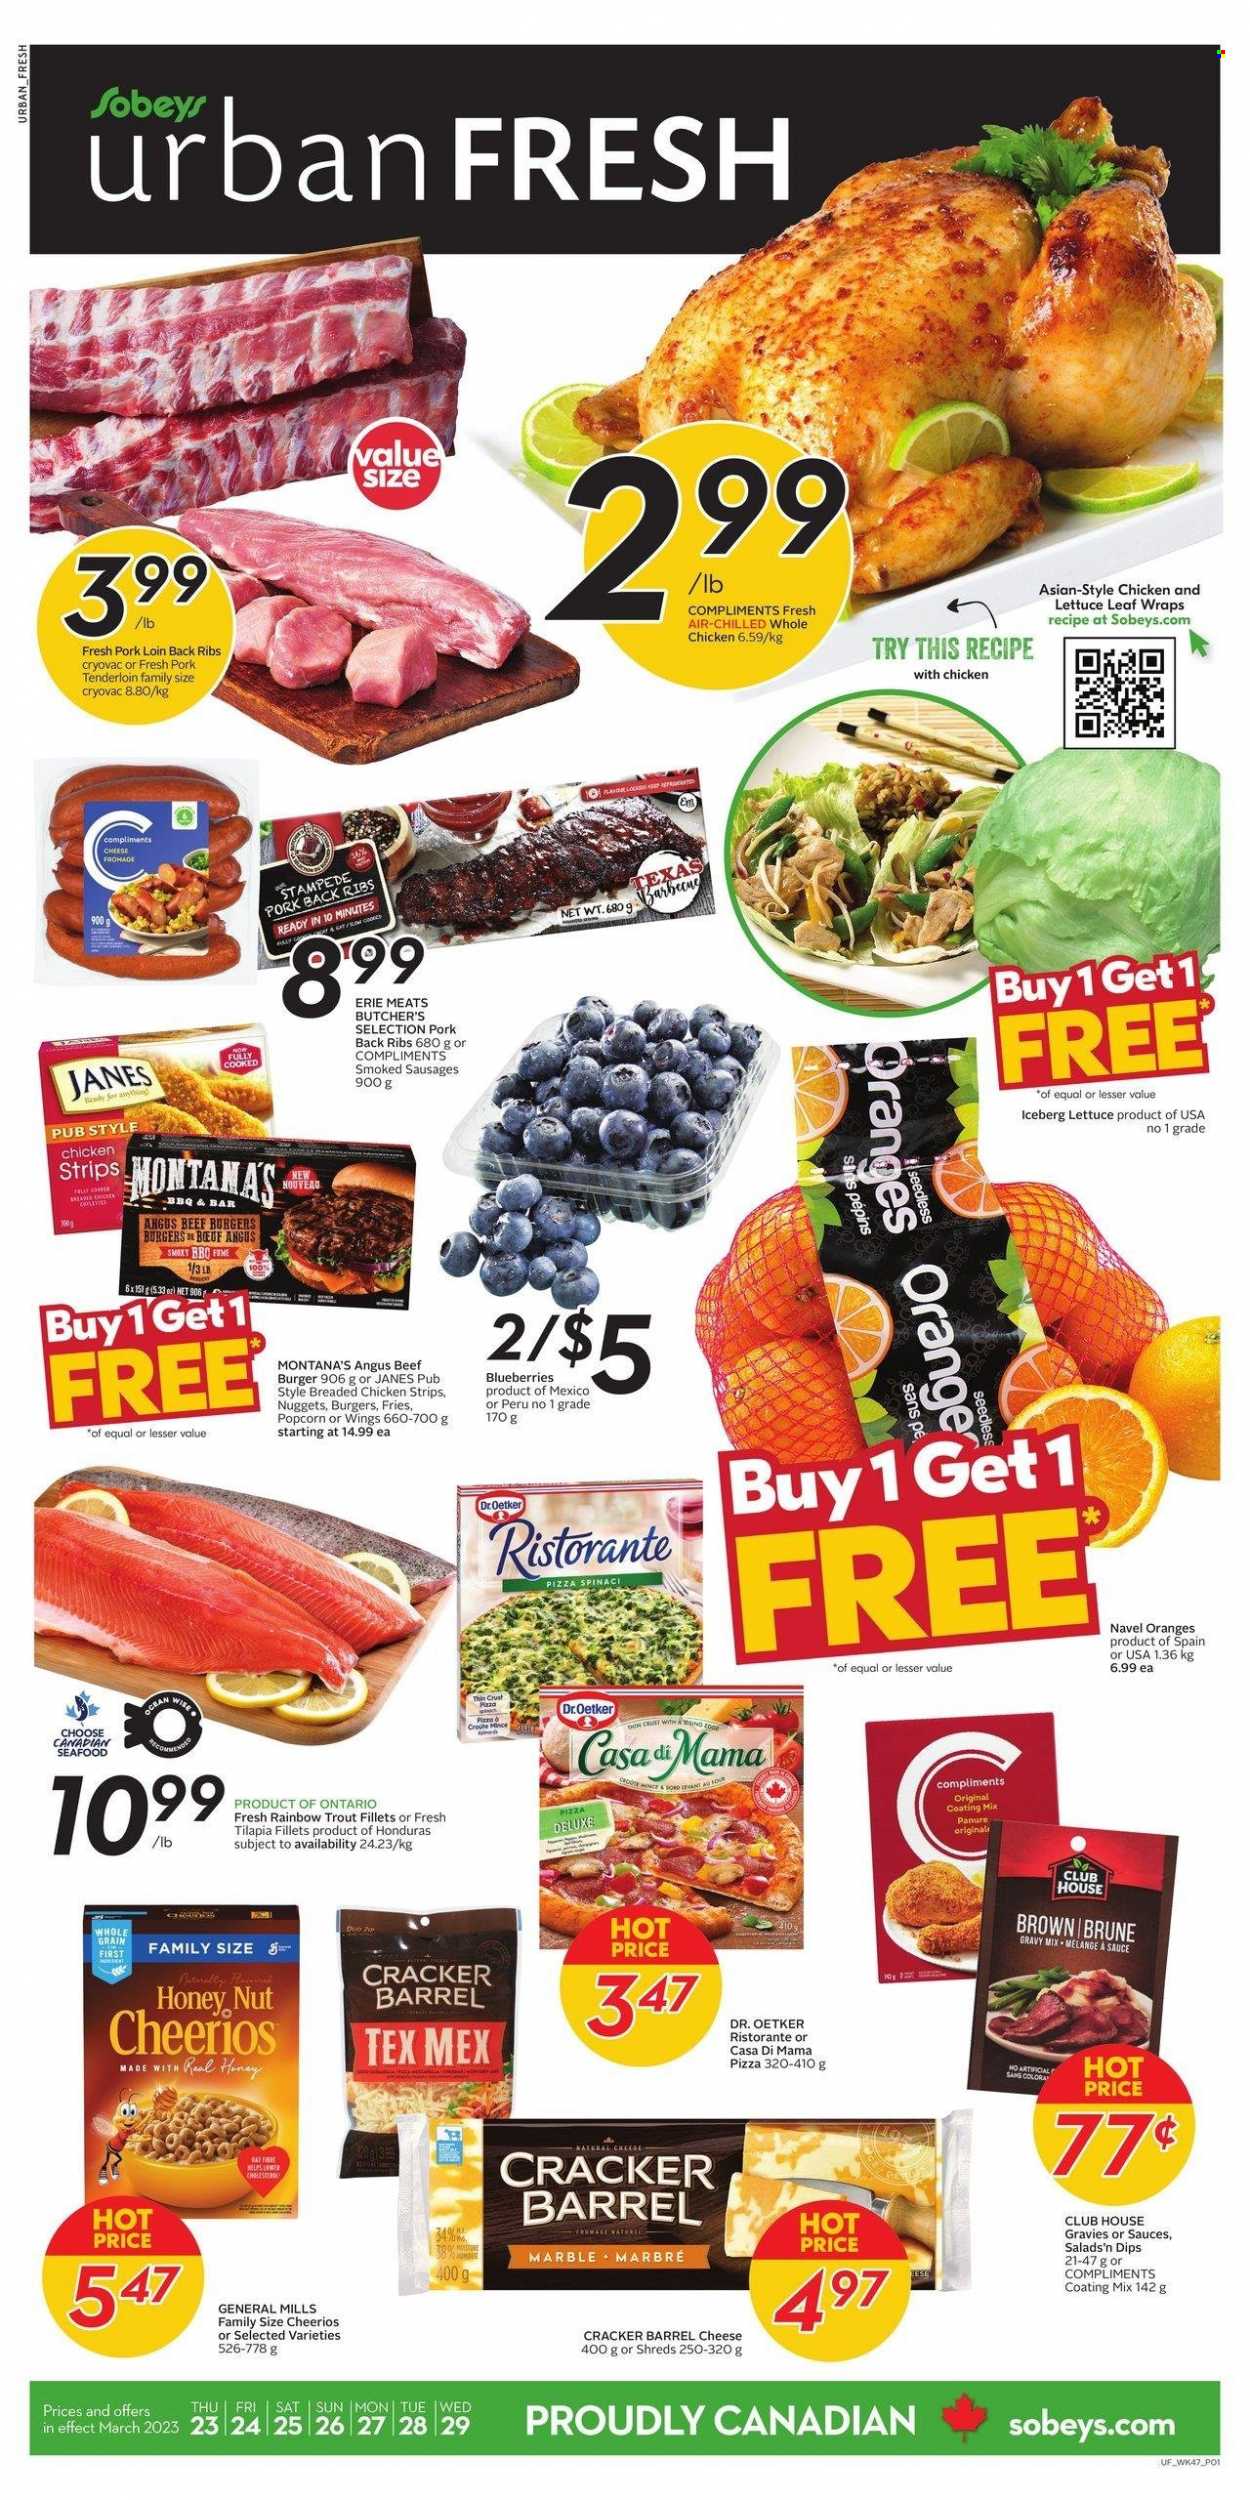 thumbnail - Sobeys Urban Fresh Flyer - March 23, 2023 - March 29, 2023 - Sales products - wraps, blueberries, oranges, navel oranges, tilapia, trout, seafood, pizza, nuggets, hamburger, fried chicken, beef burger, sausage, Dr. Oetker, strips, chicken strips, potato fries, crackers, popcorn, Cheerios, gravy mix, whole chicken, chicken, beef meat, ribs, pork loin, pork meat, pork ribs, pork tenderloin, pork back ribs. Page 1.